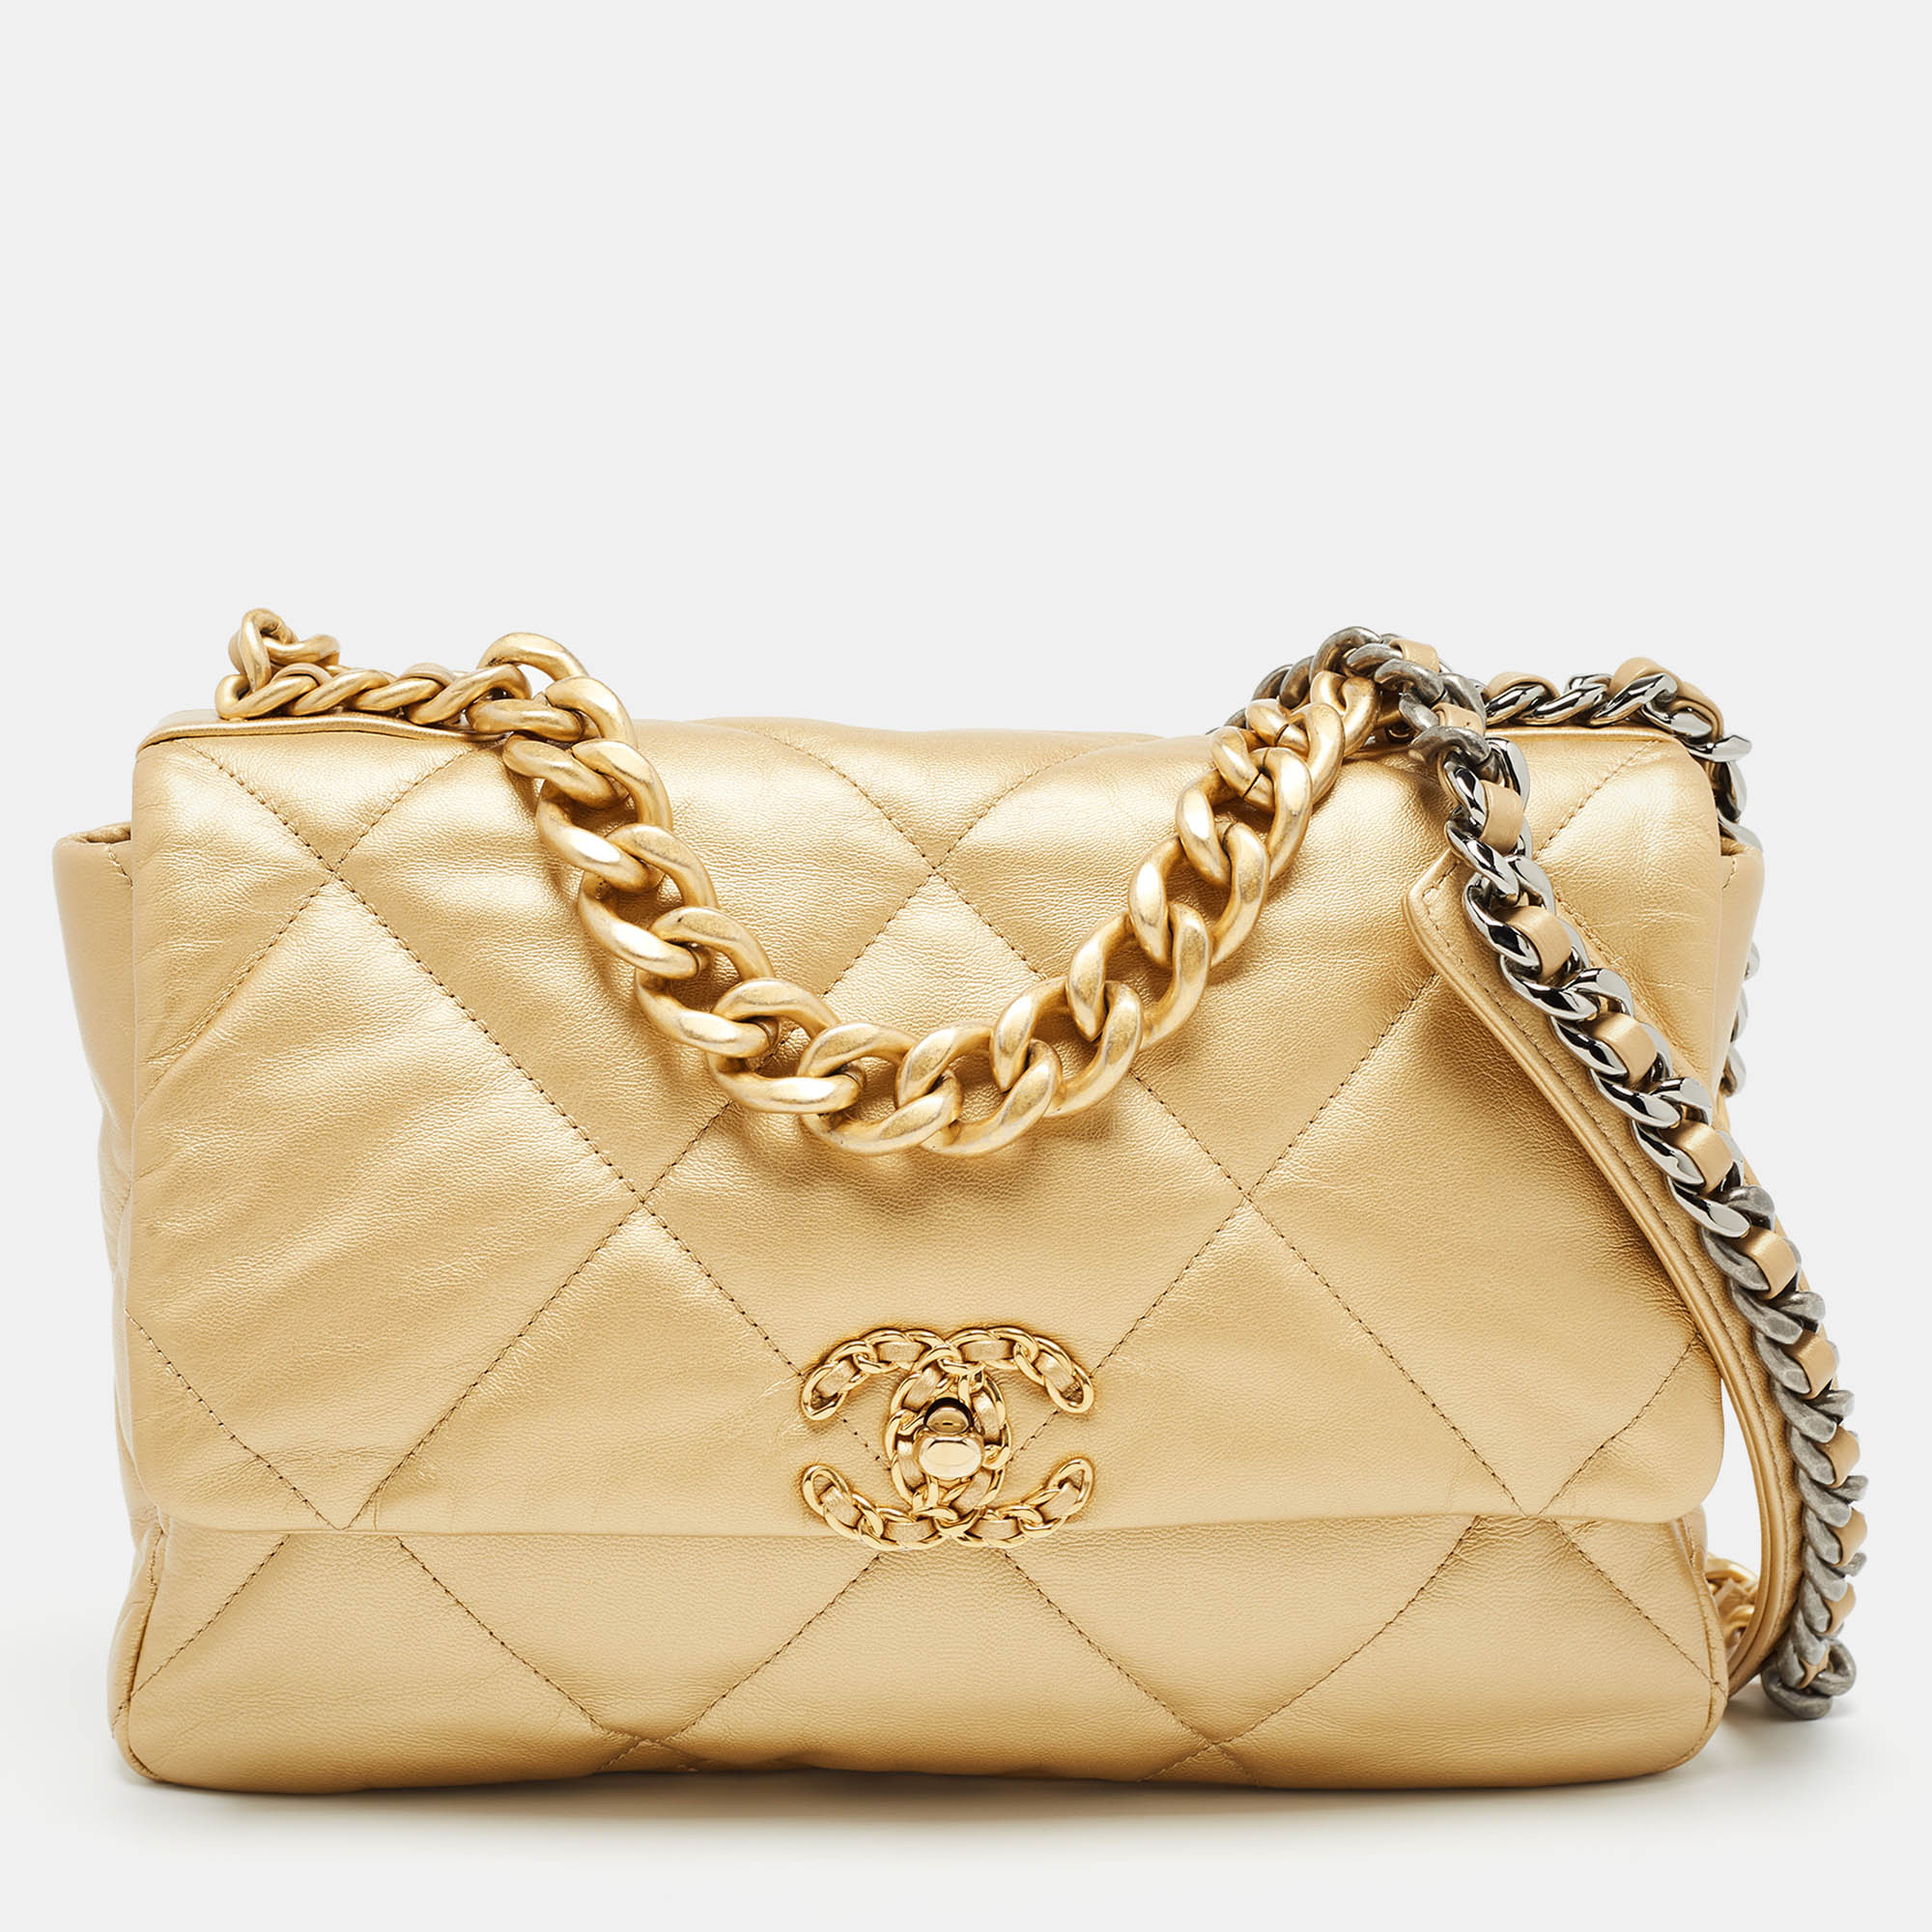 Chanel gold quilted leather large 19 flap bag